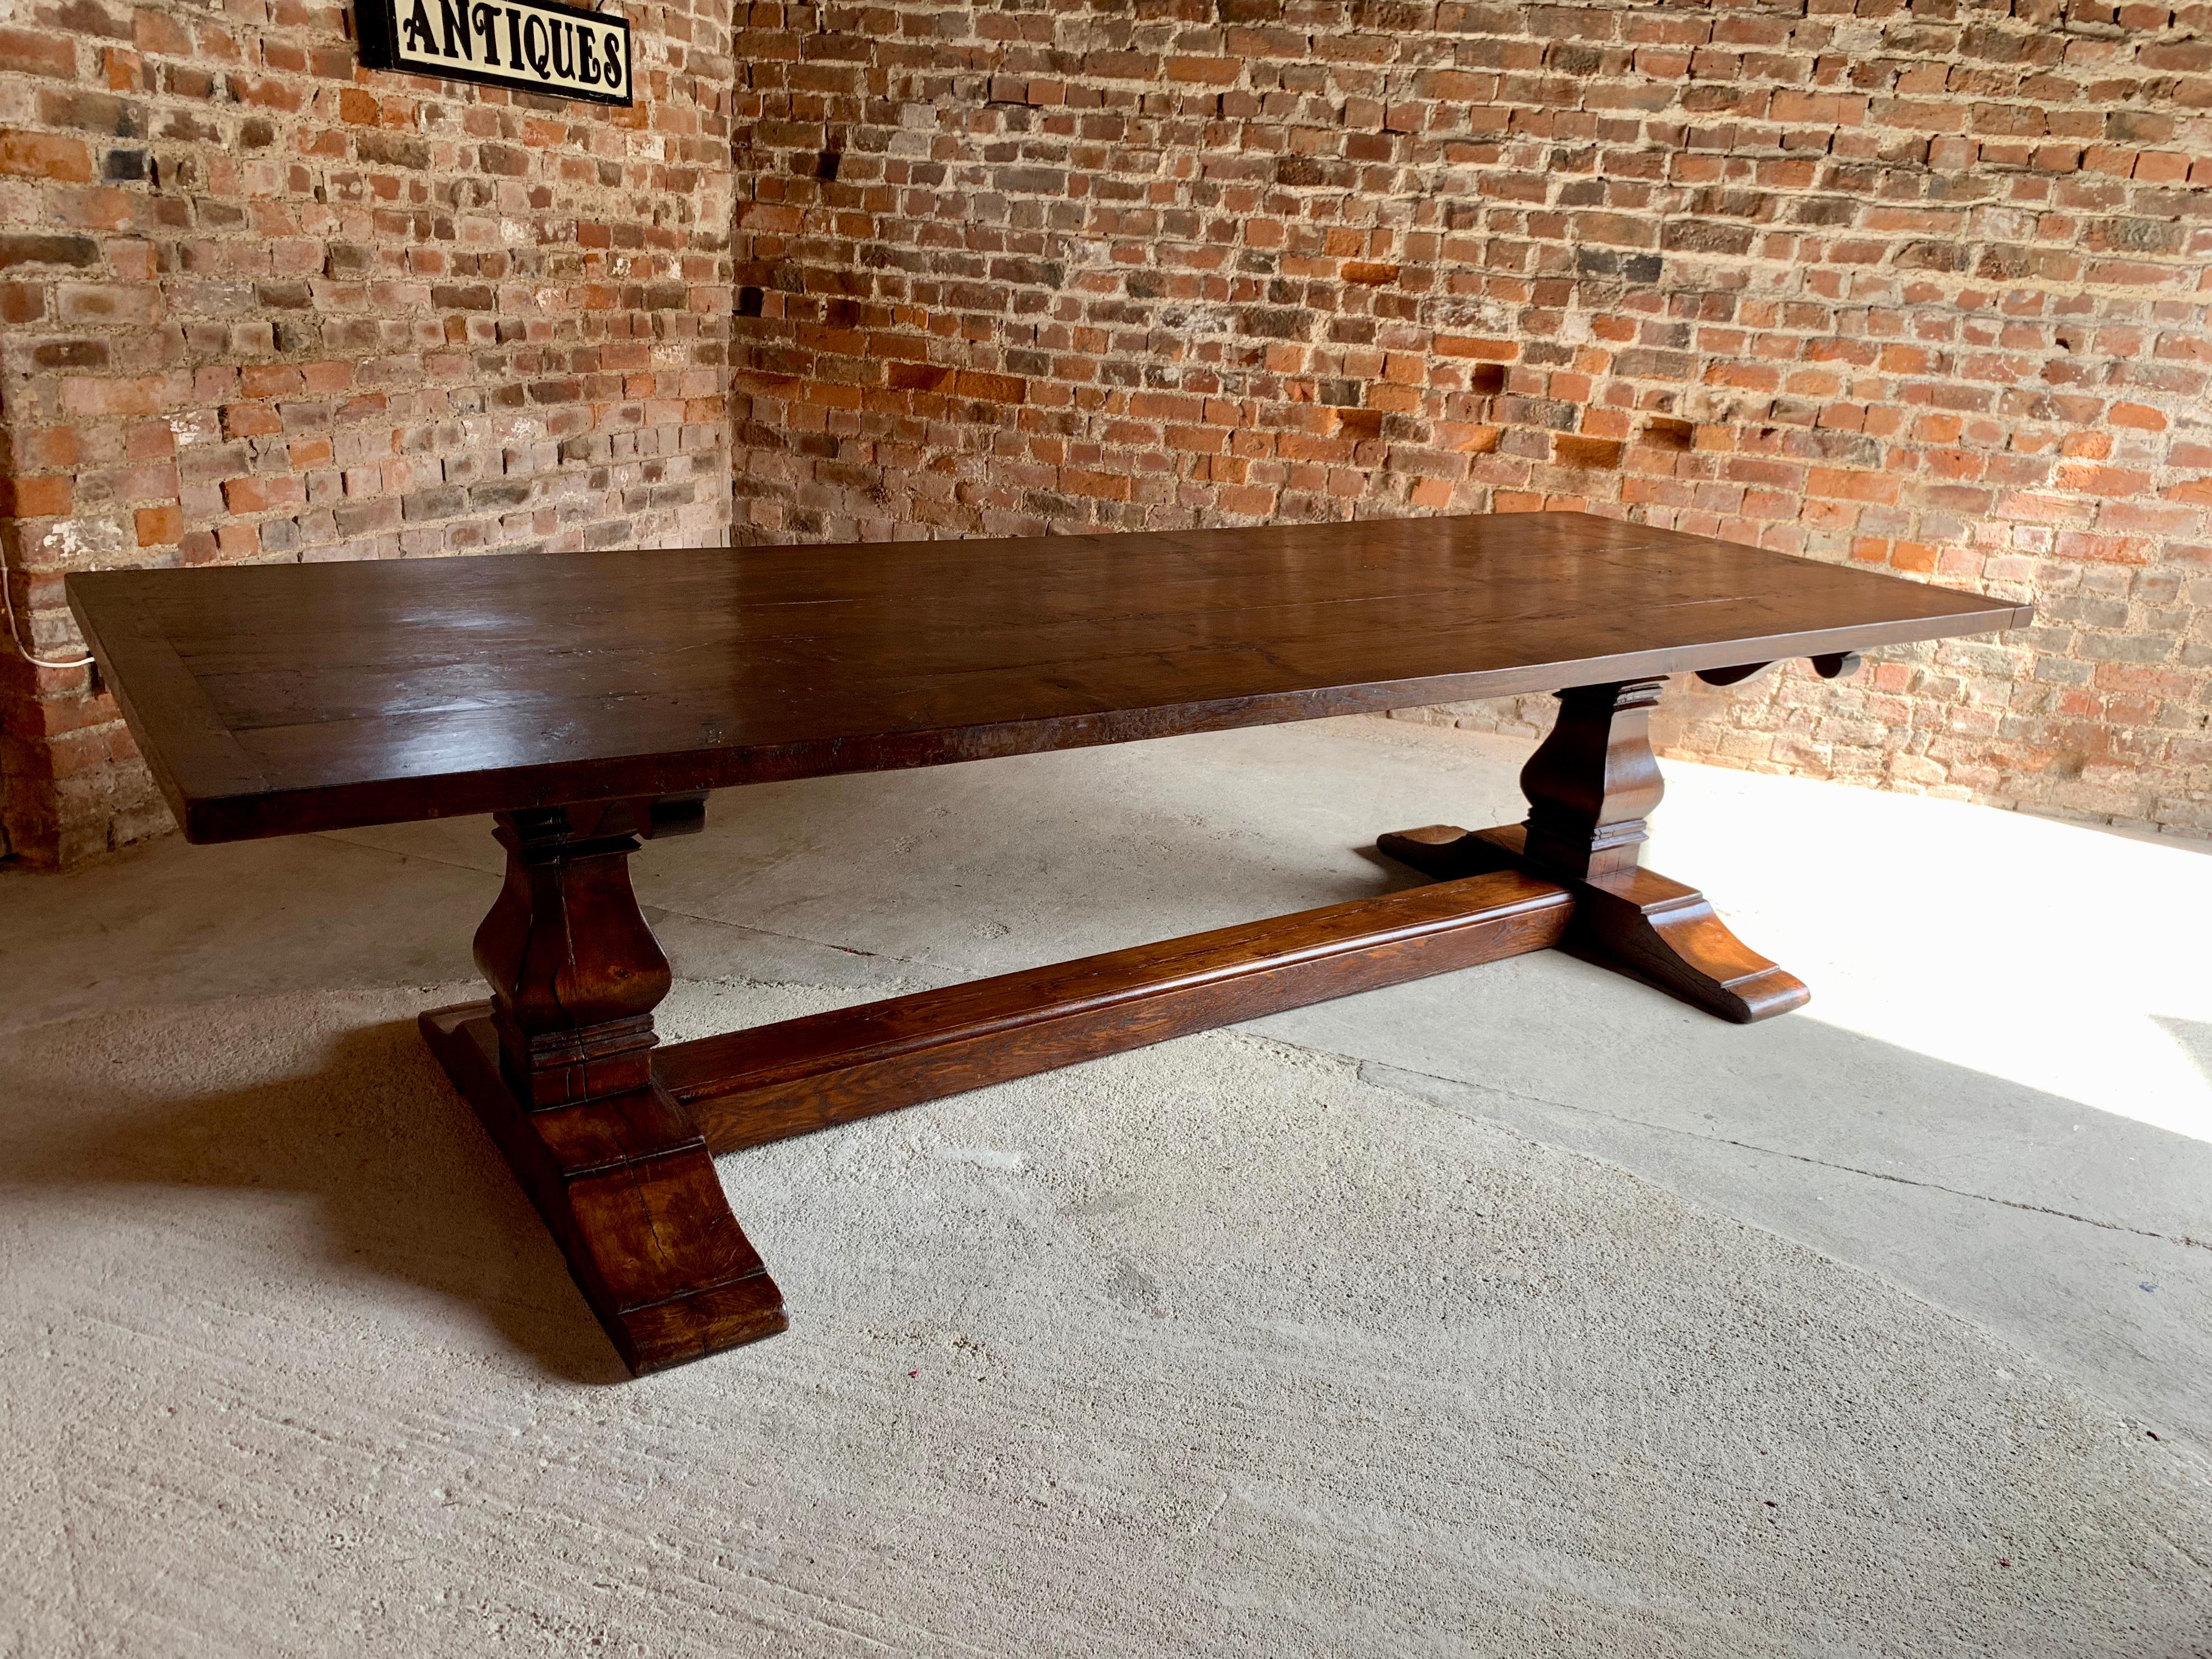 20th Century Antique Refectory Dining Table Solid Oak Huge 17th Century Style Bylaws 10 Foot